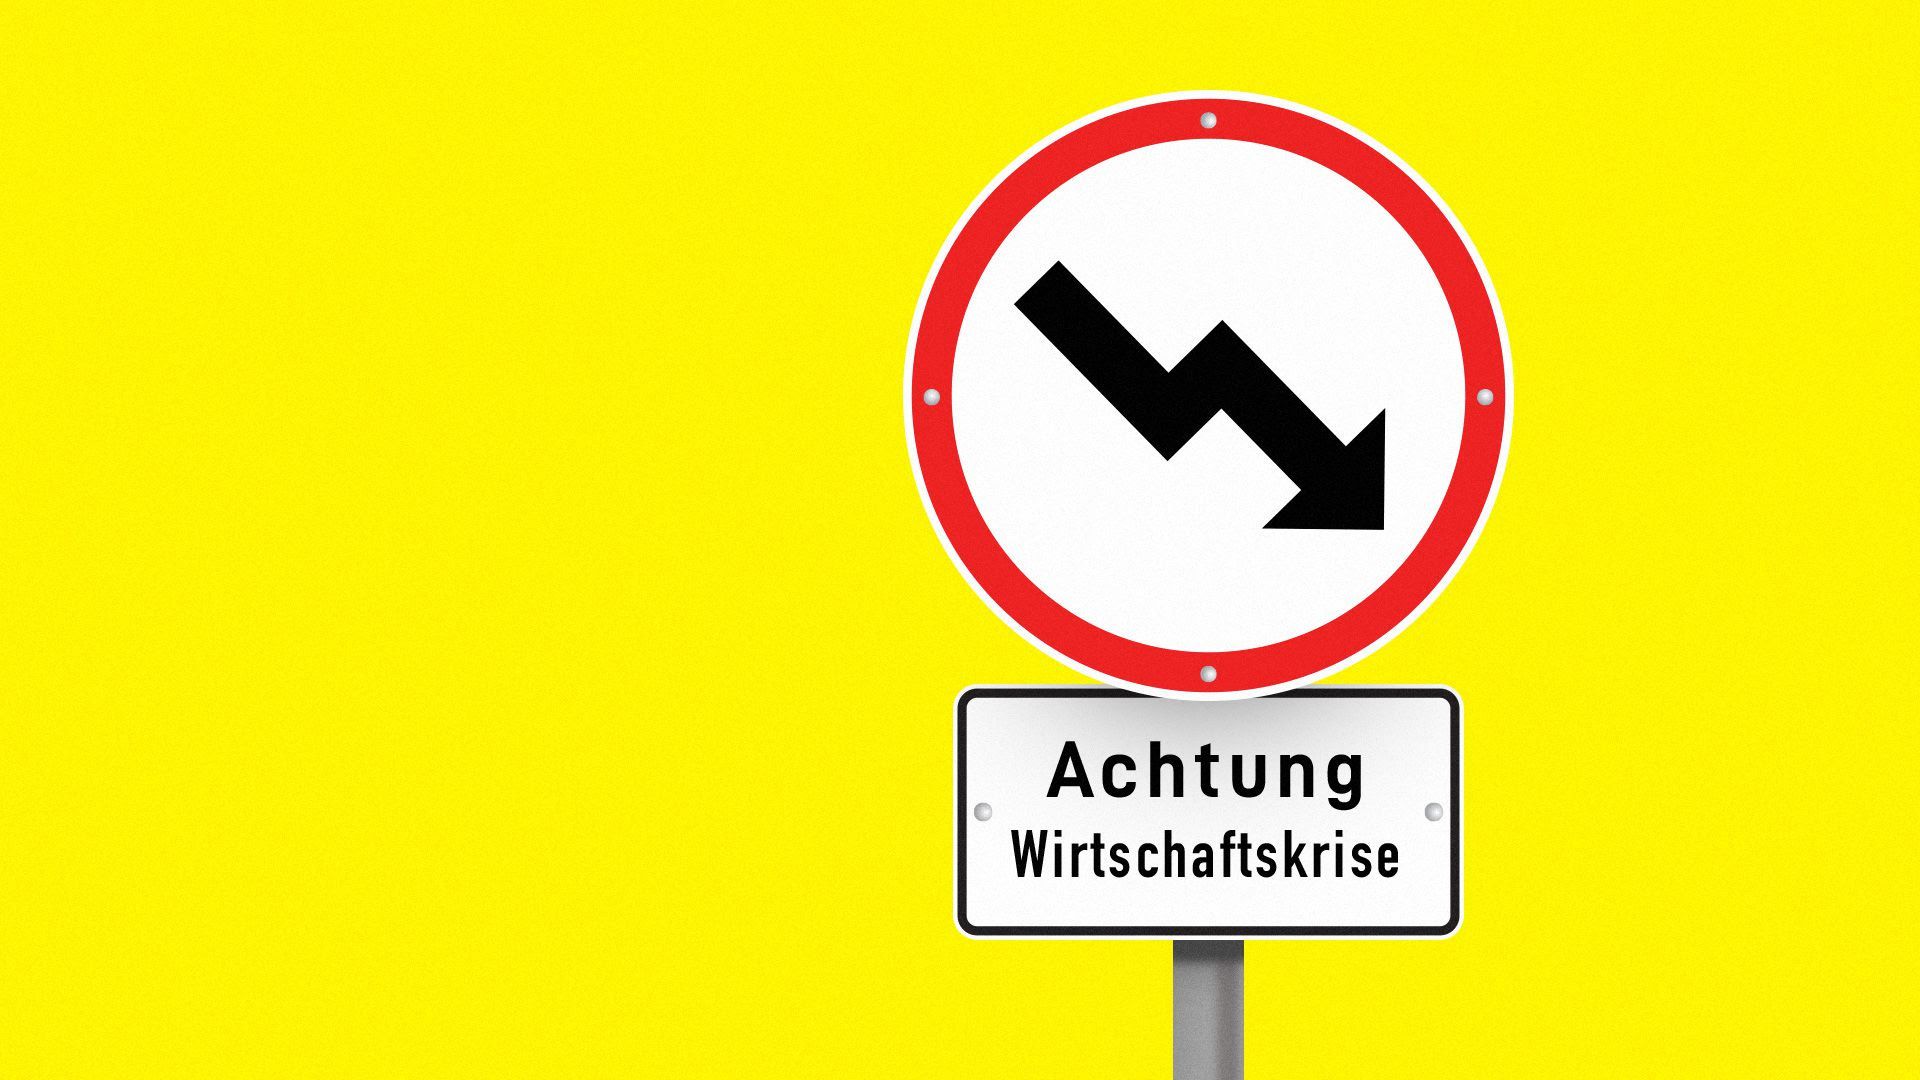 A sign in German warning us of an economic crisis